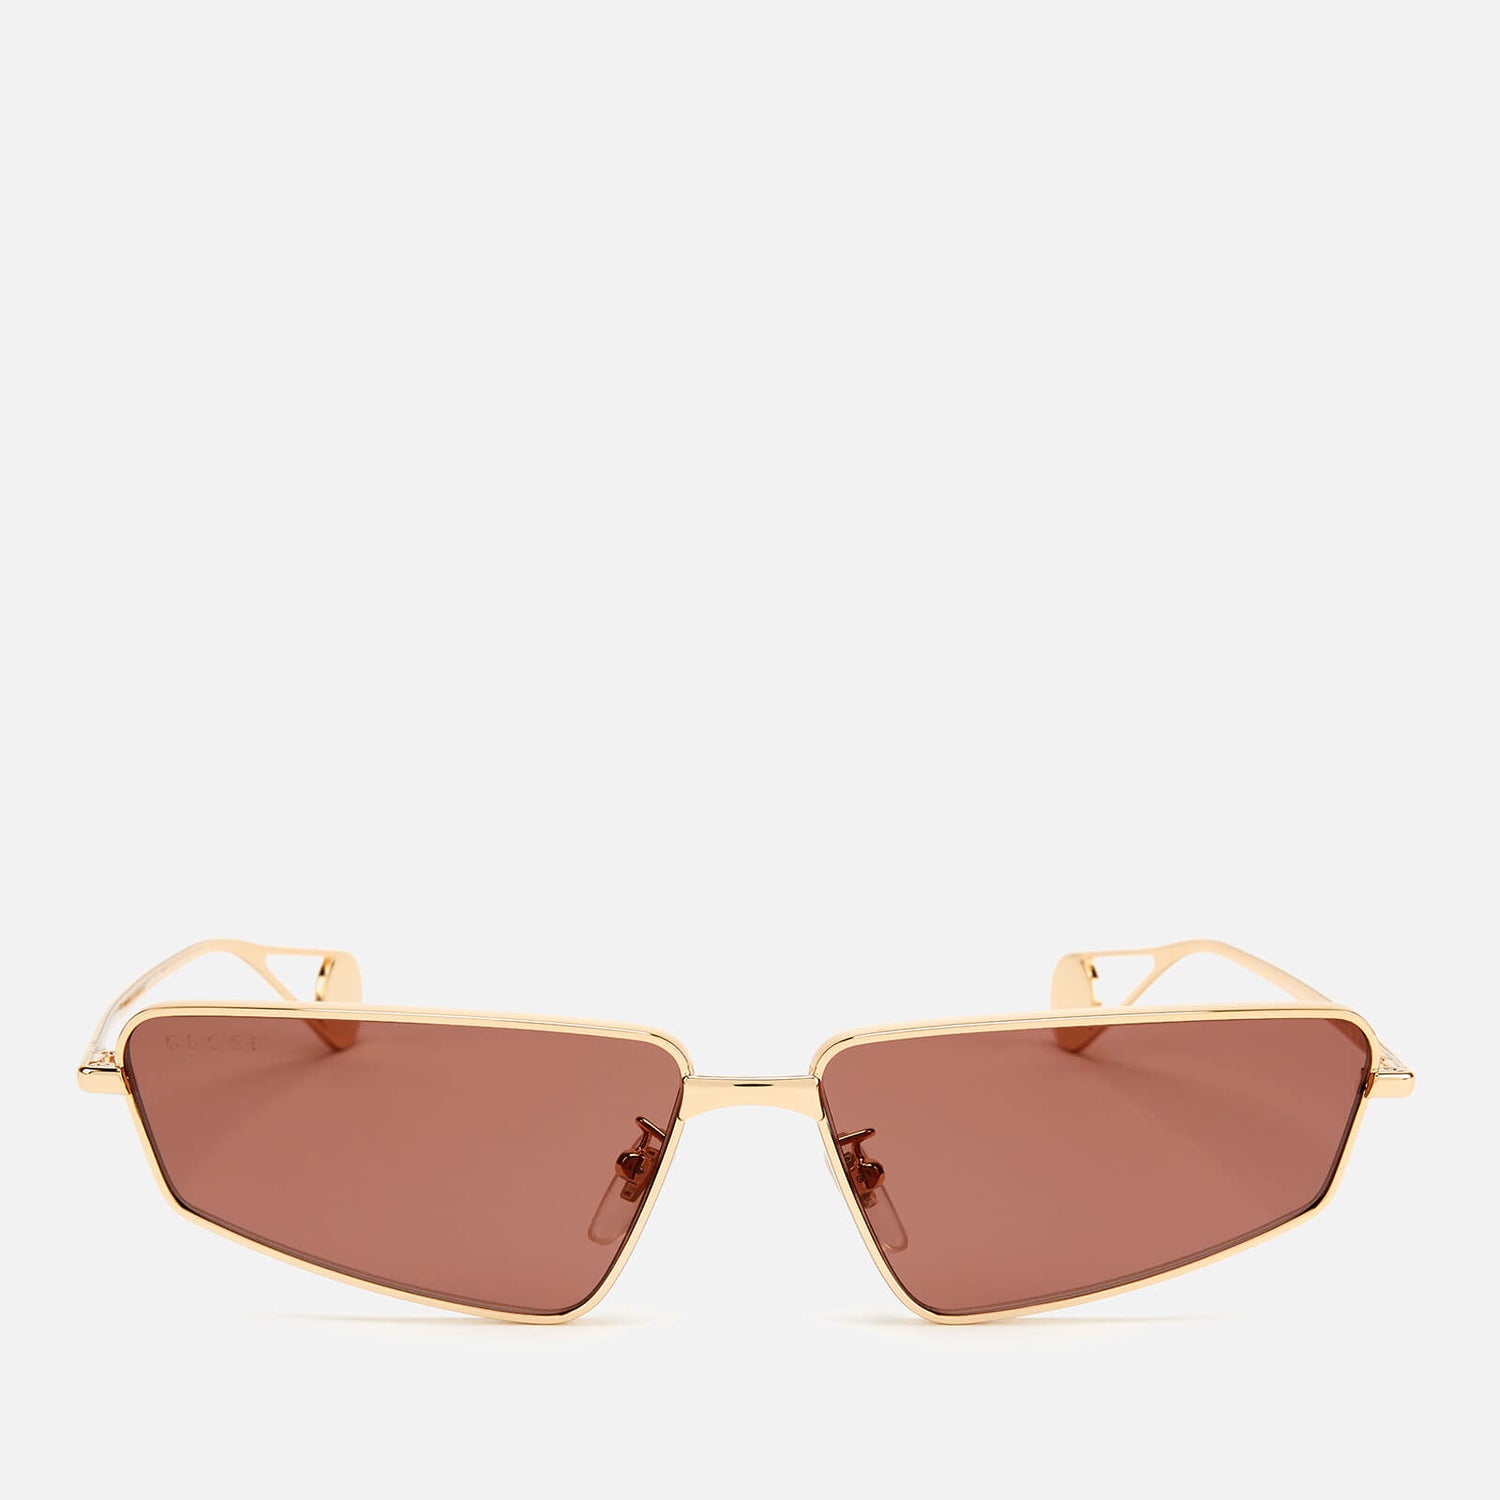 Gucci Women's Small Frame Metal Sunglasses - Gold/Red